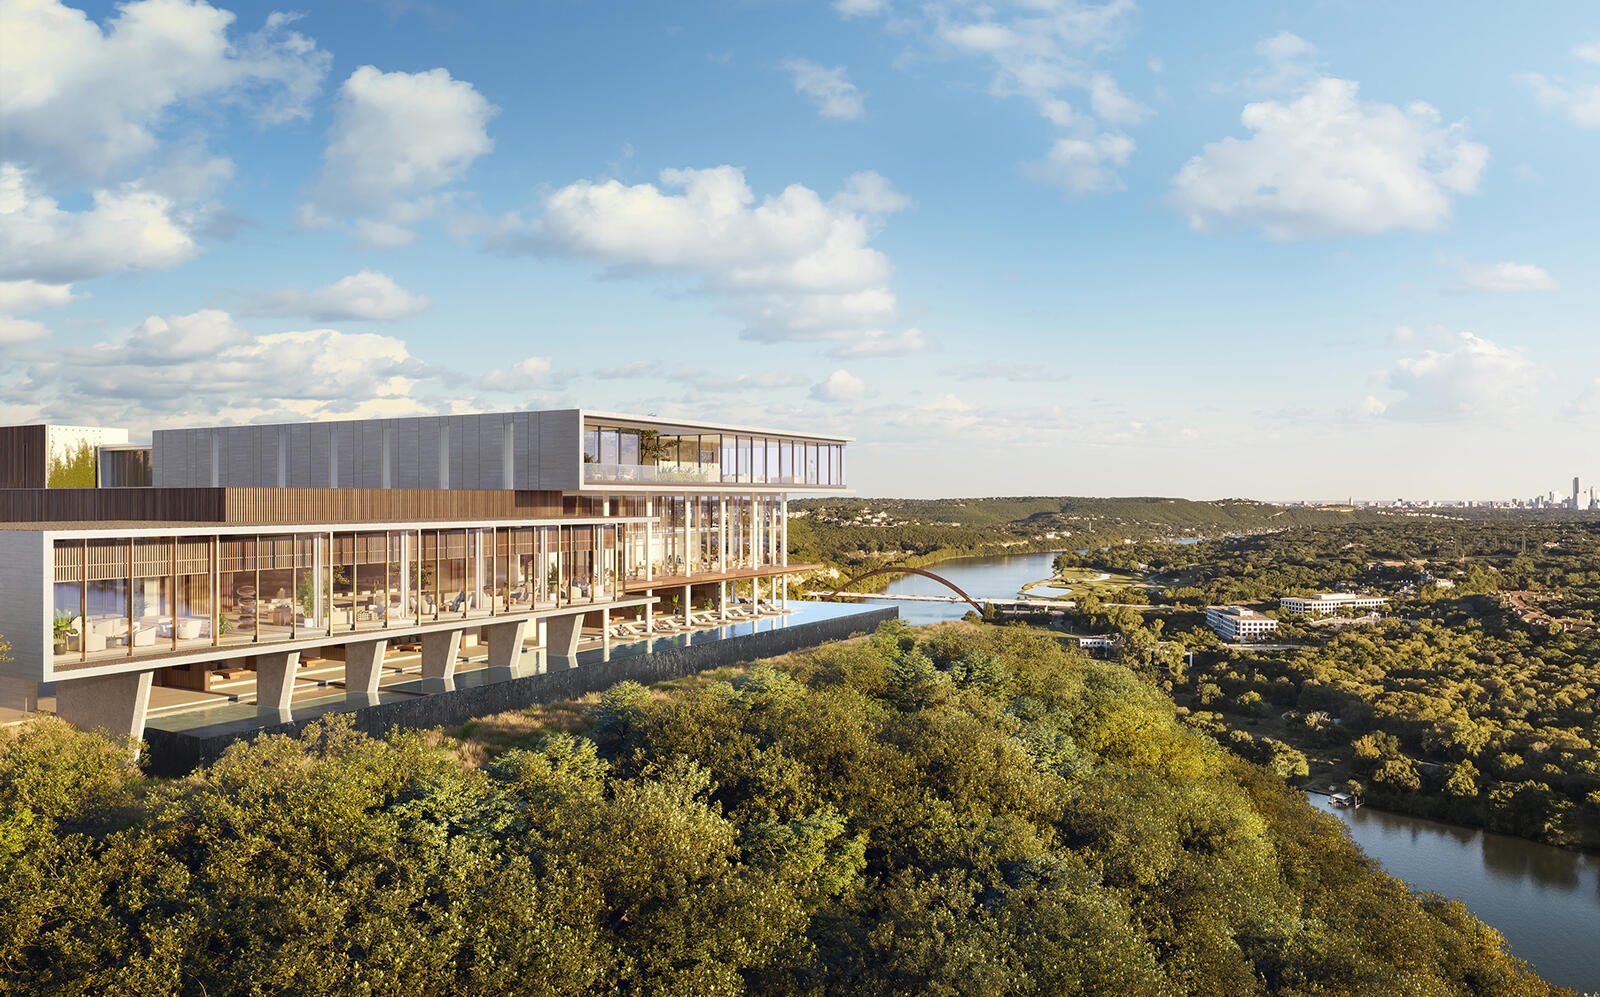 Infinity Pool and Shared Amenity Spaces at Four Seasons Private Residences Lake Austin (Rendering by DBOX for Austin Capital Partners)